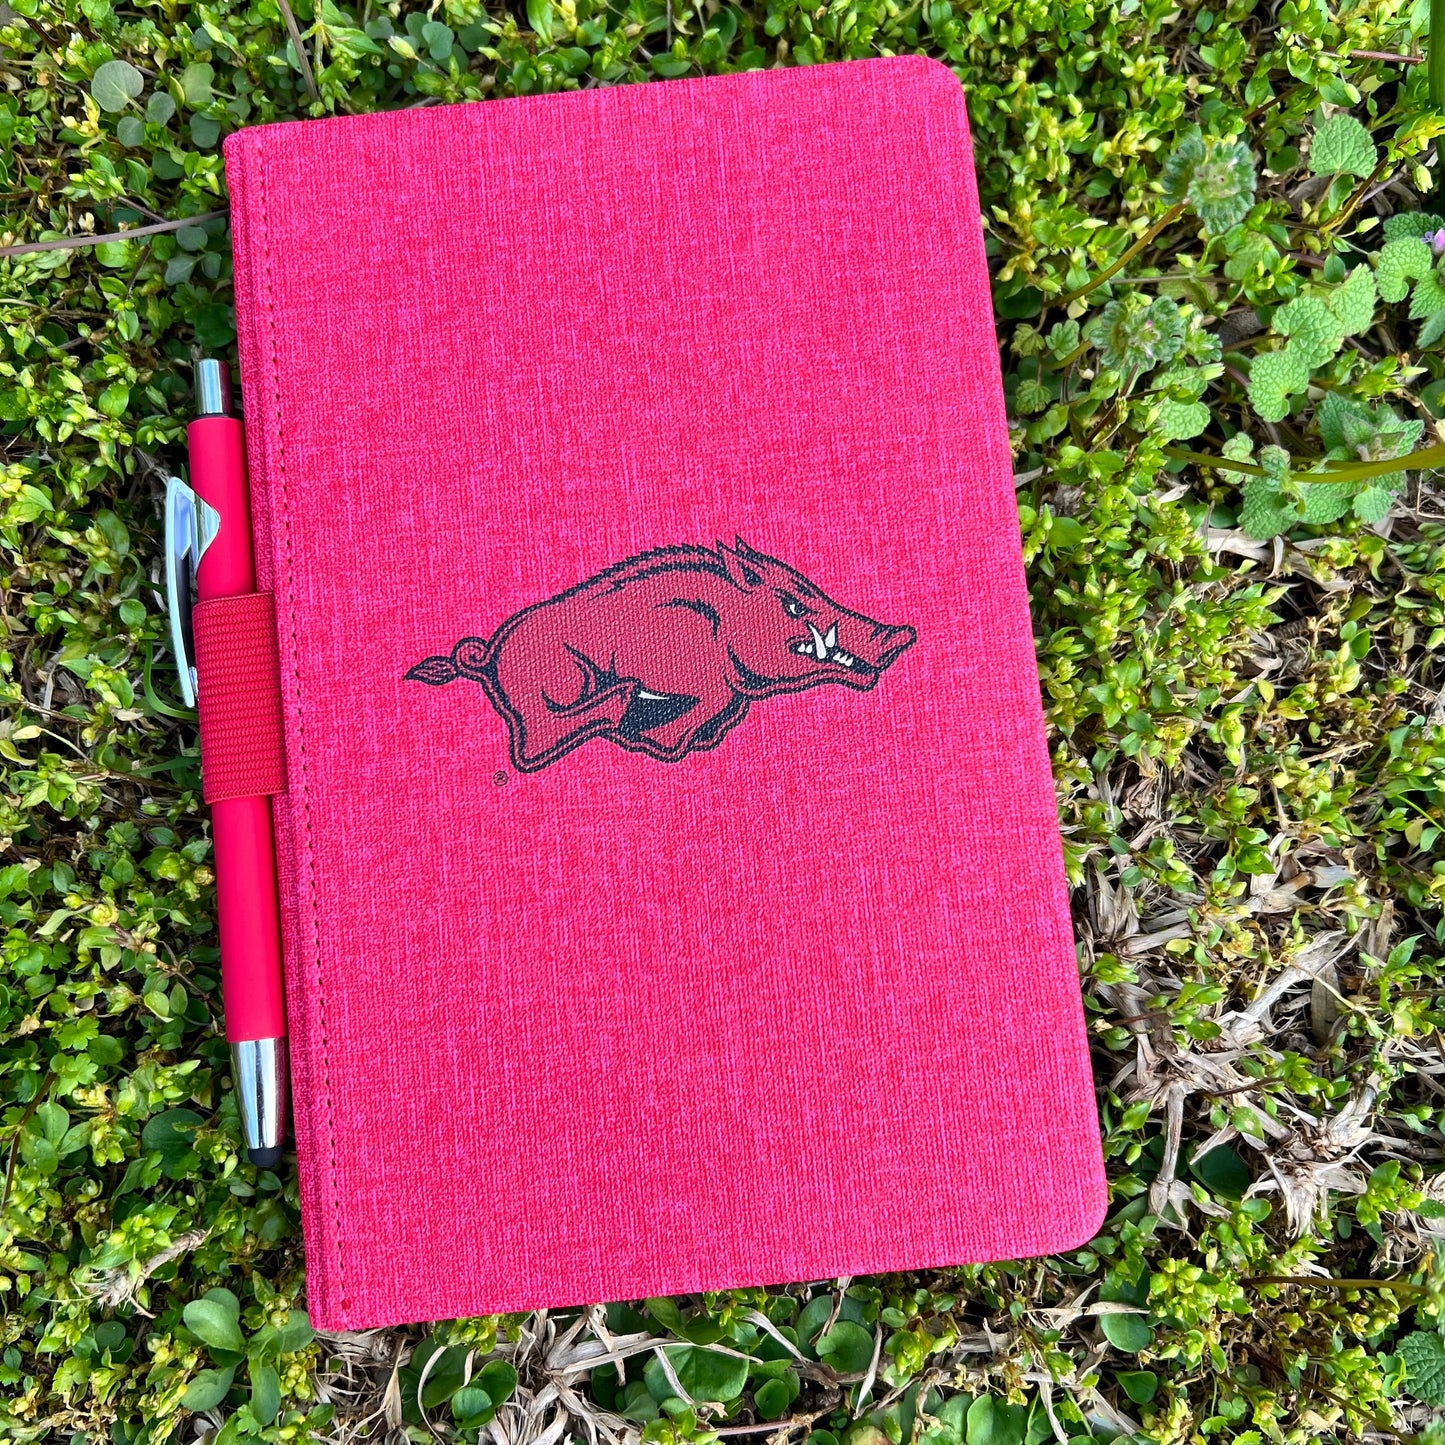 red journal with razorback logo in the center and red pen attached to the side with elastic loop.